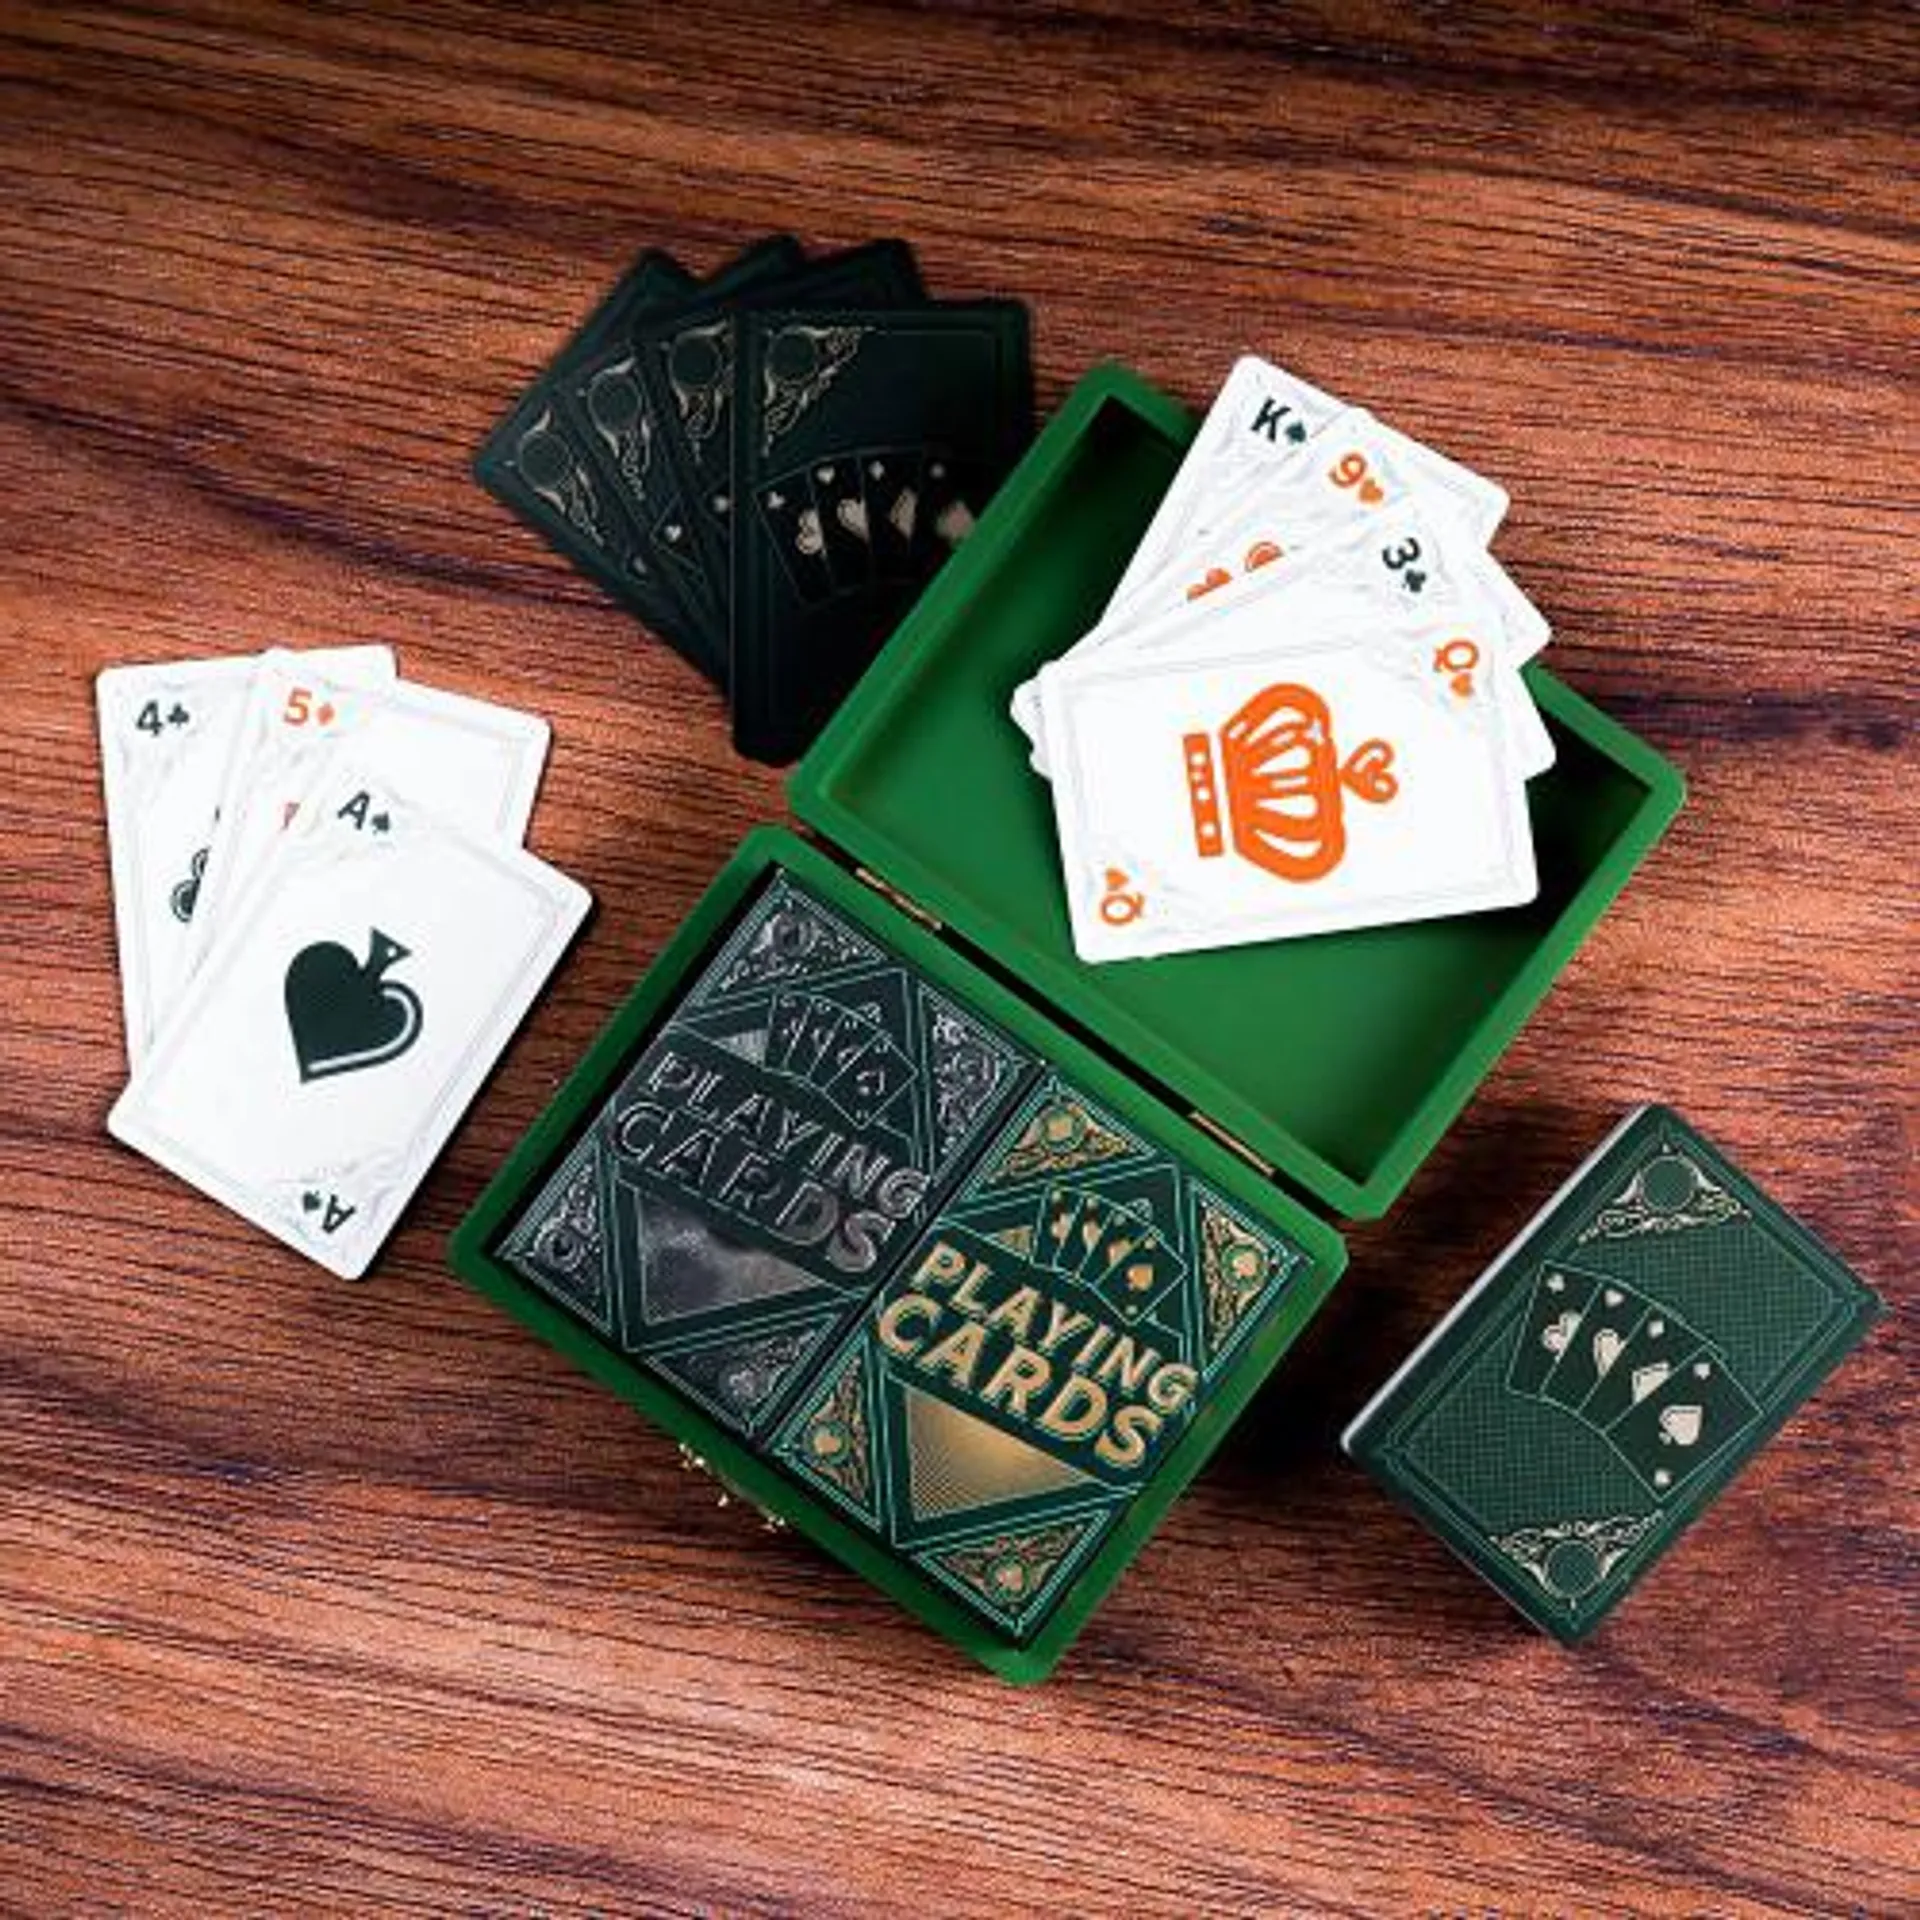 2 Packs of Playing Cards in a Wooden Box